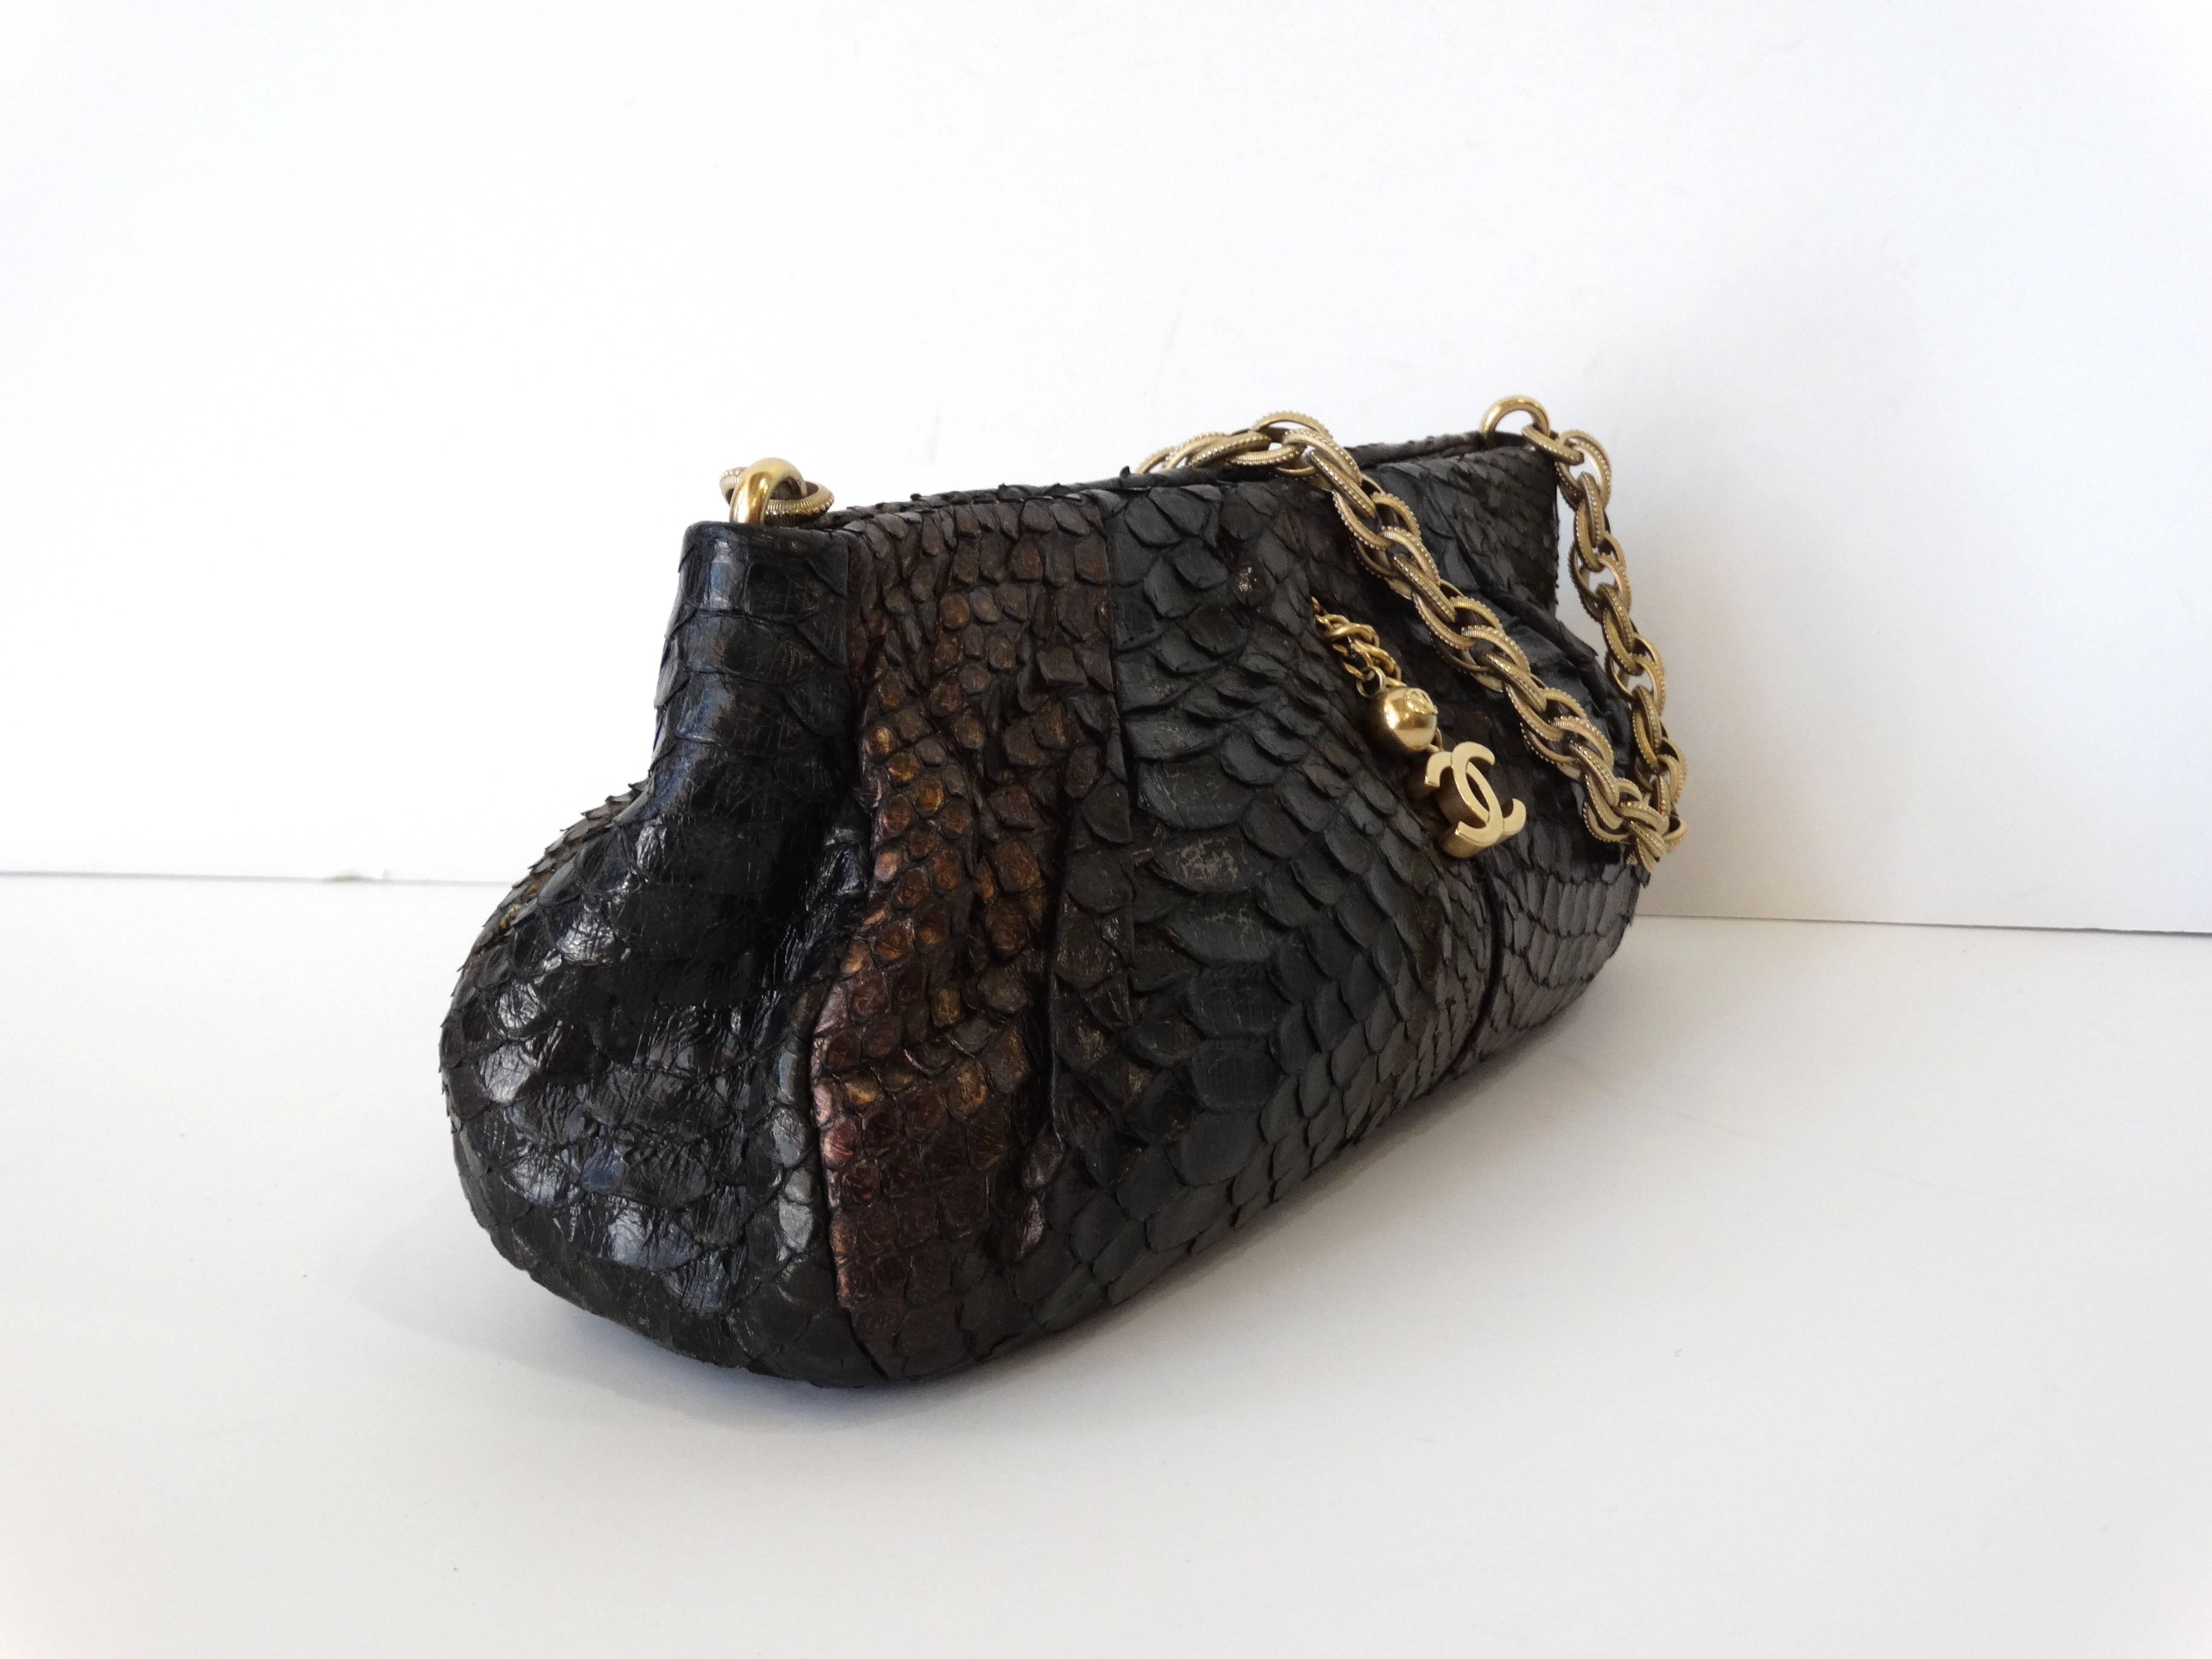 Beautifully constructed in metallic iridescent blend of olive, purple with gray undertones in genuine buttery python skin. This pleated clutch pochette features an aged gold tone bijoux chain strap, front and back CC pearl charms as side bag pulls.